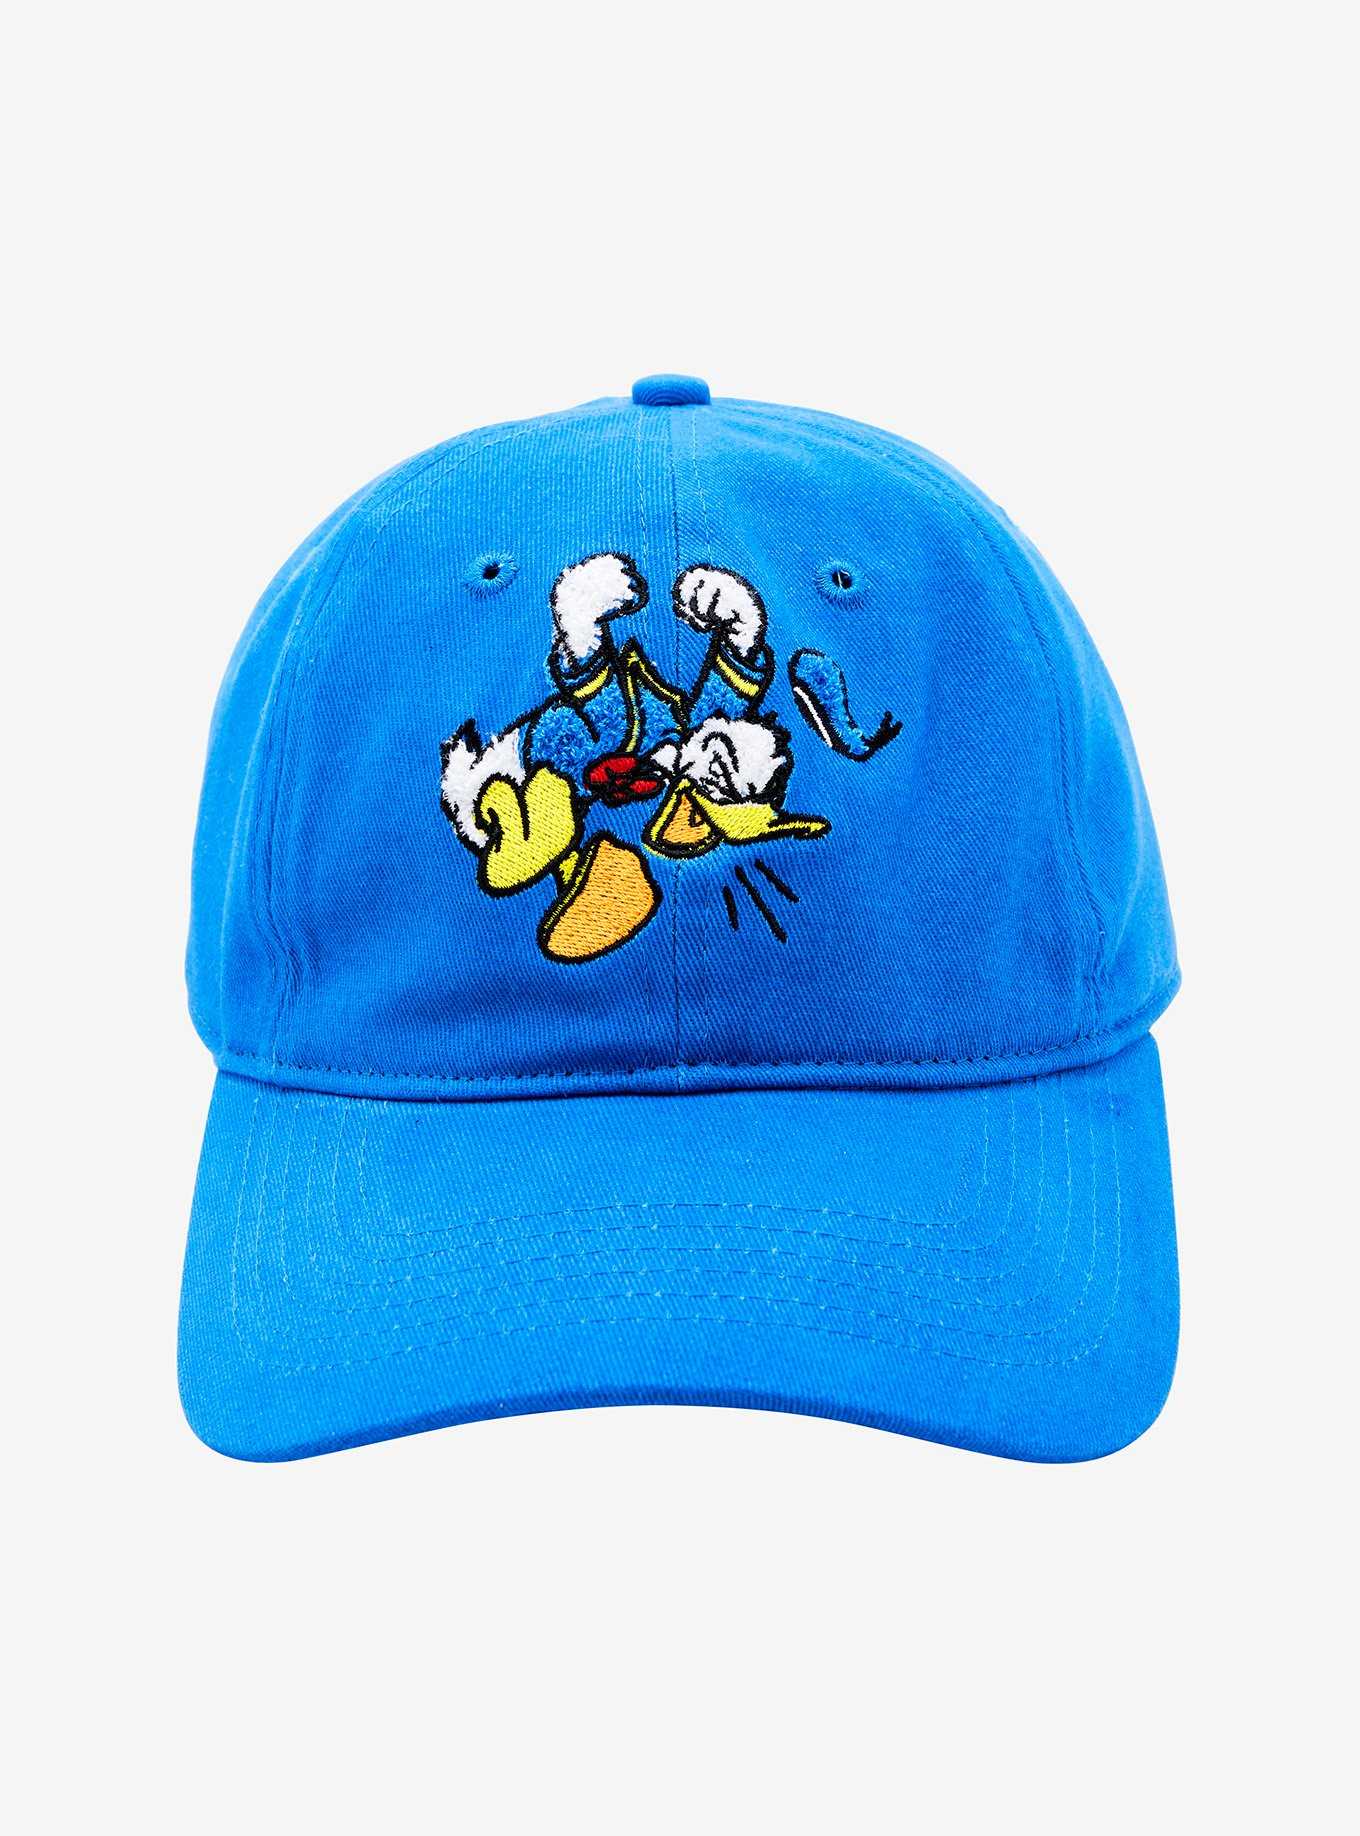 Disney Donald Duck Angry Cap - BoxLunch Exclusive, , hi-res